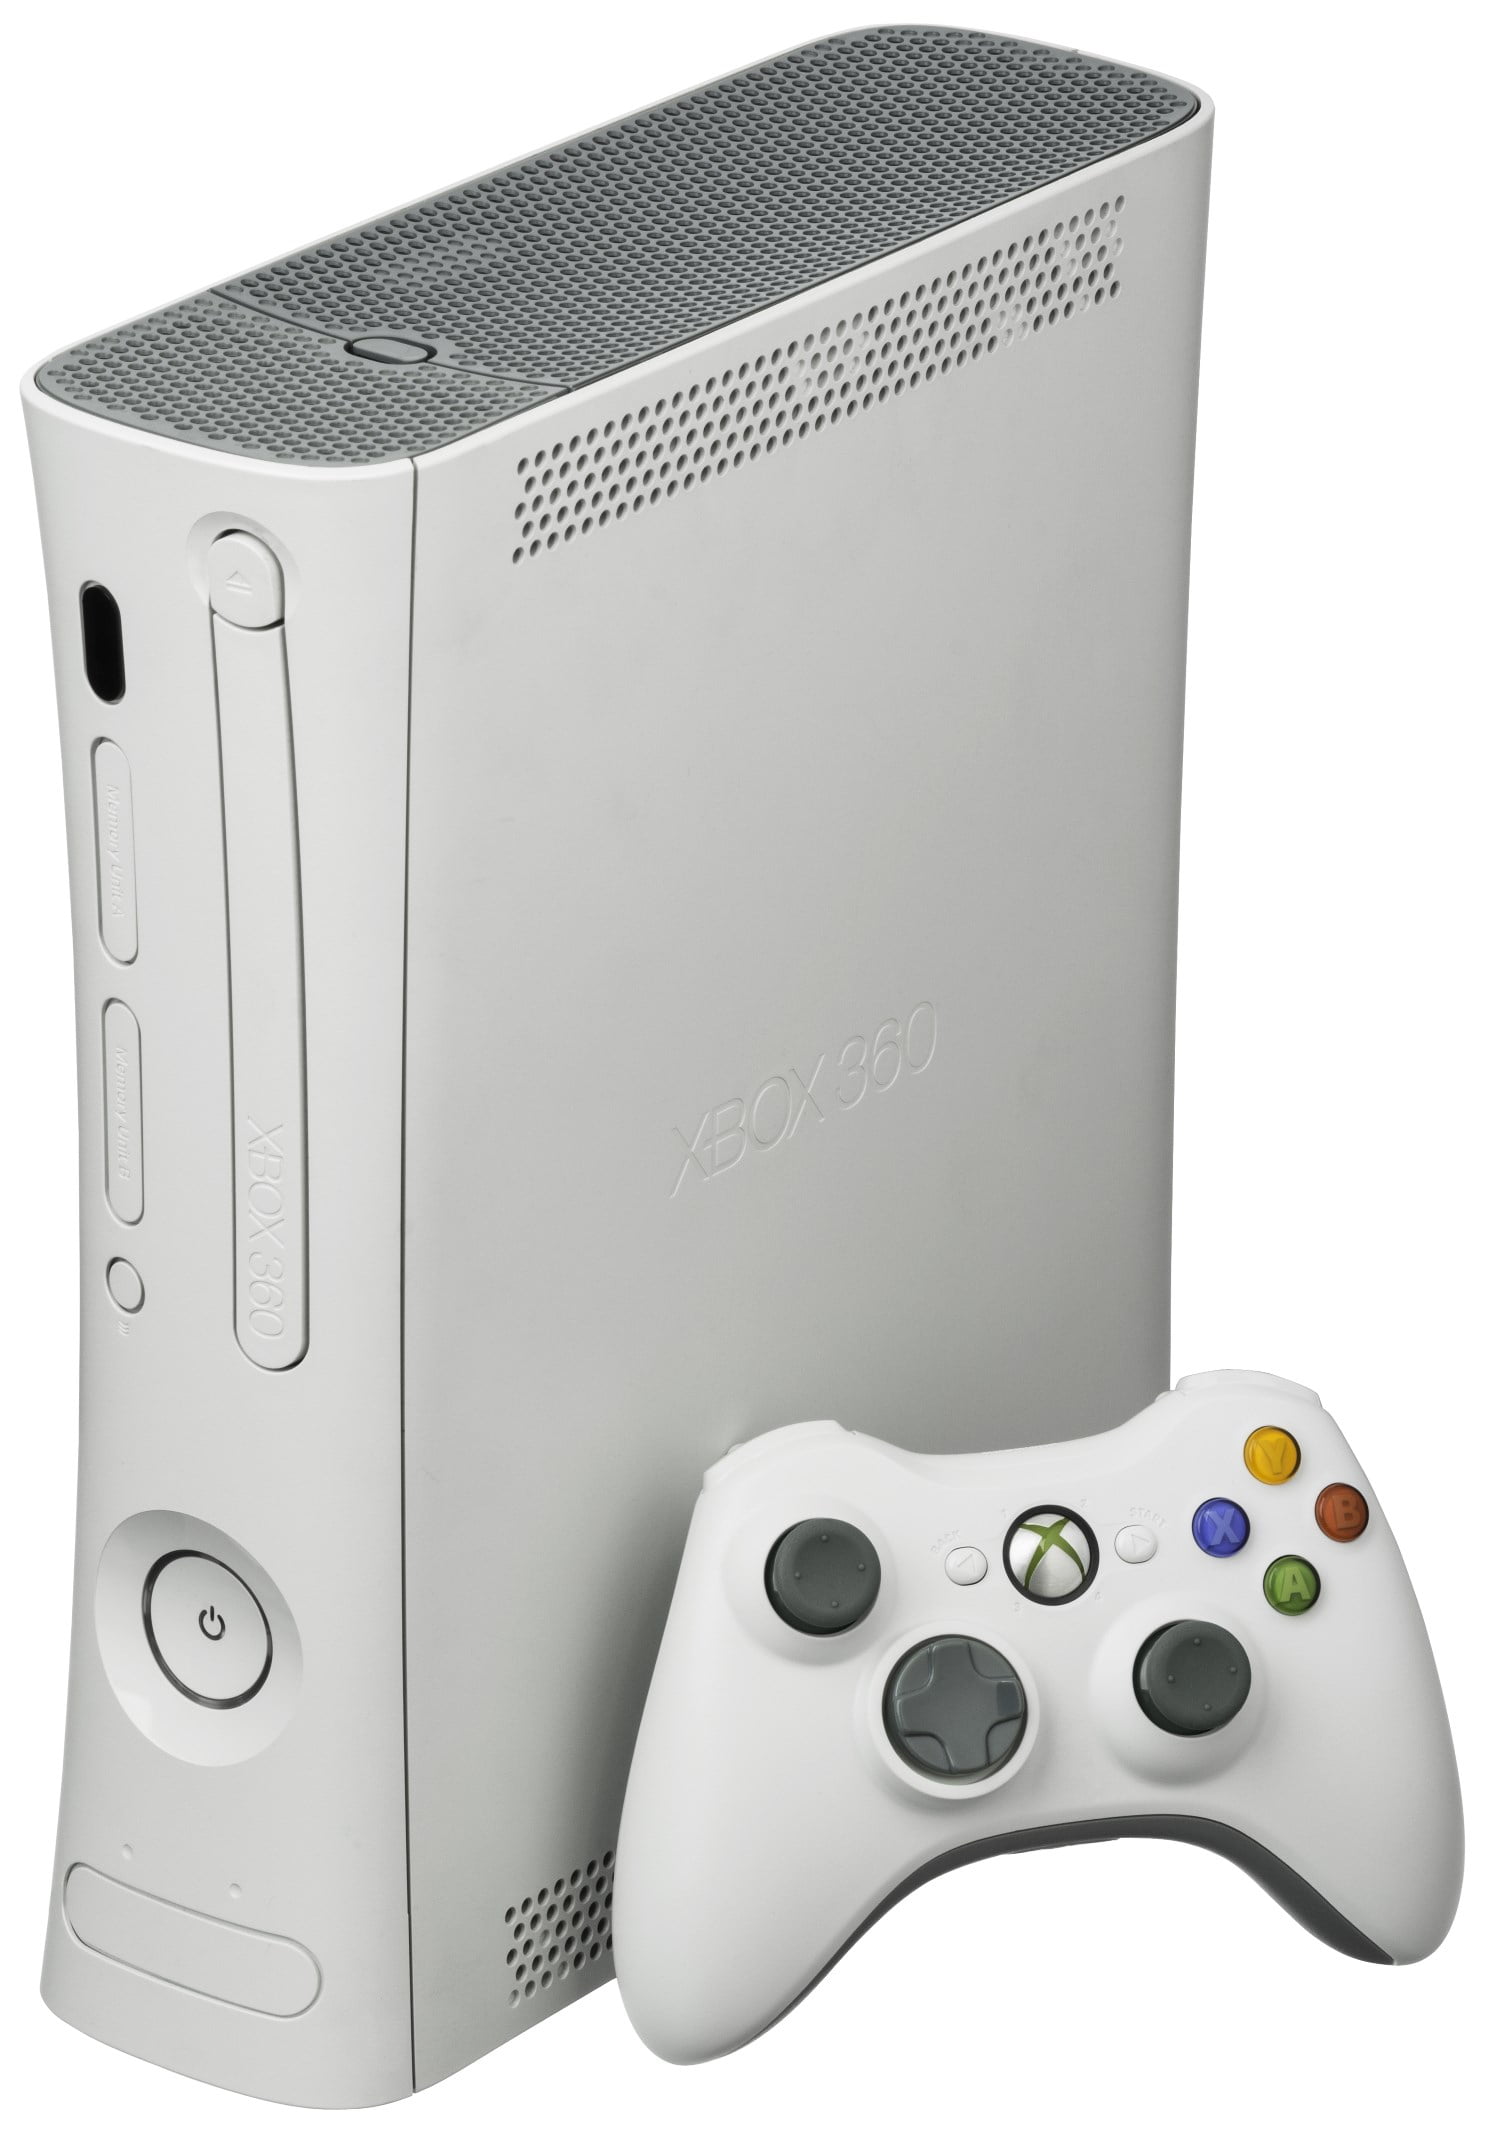 Refurbished Xbox 360 Core Console Video Game System